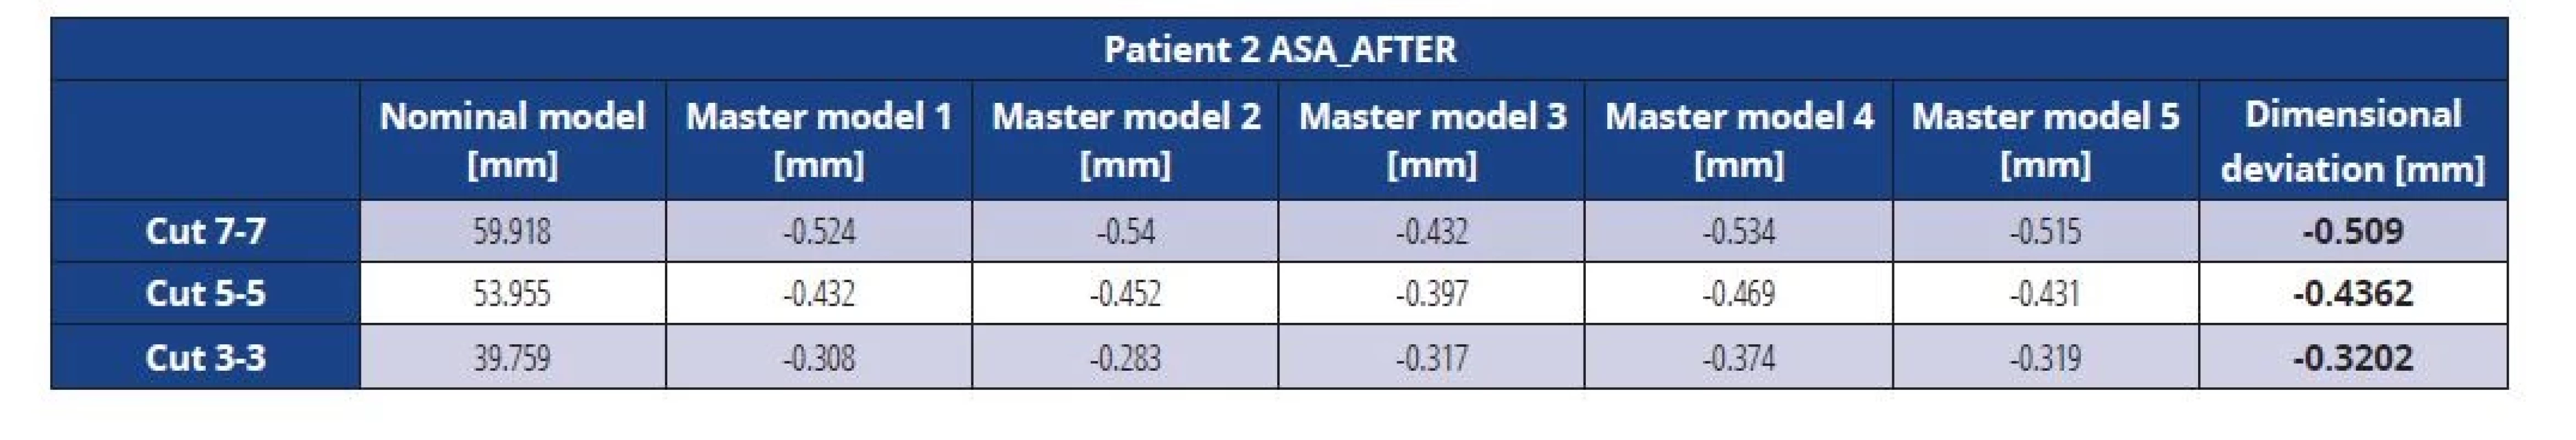 Dimensional deviations of the ASA master model after vacuuming (patient 2)